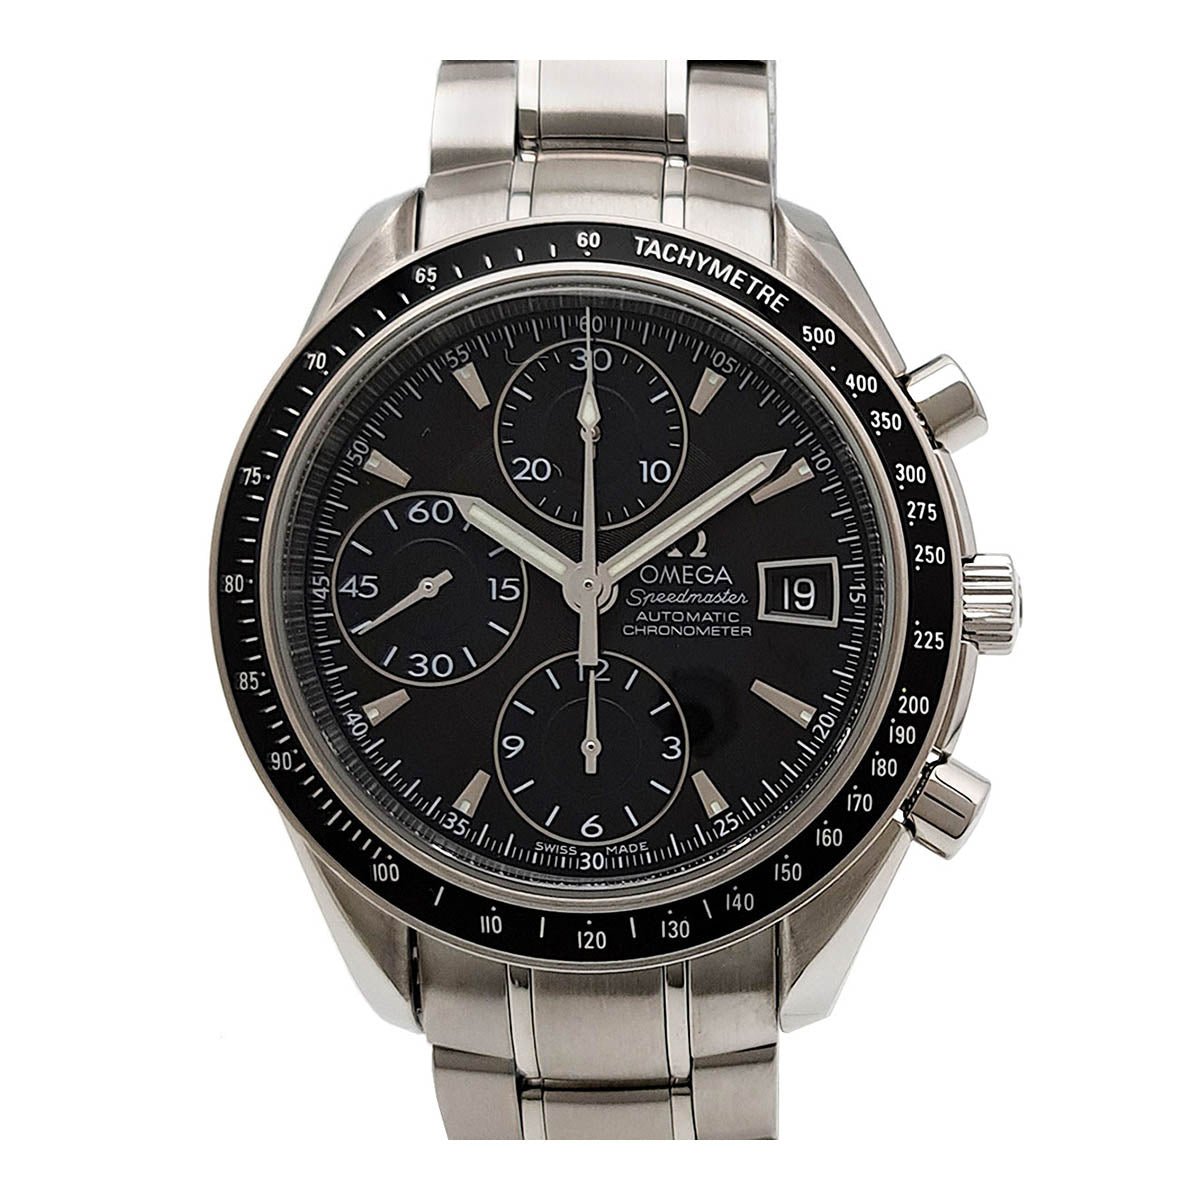 OMEGA Speedmaster Date Chronograph 3210.50 Automatic Stainless Steel Men's Watch 3210.5